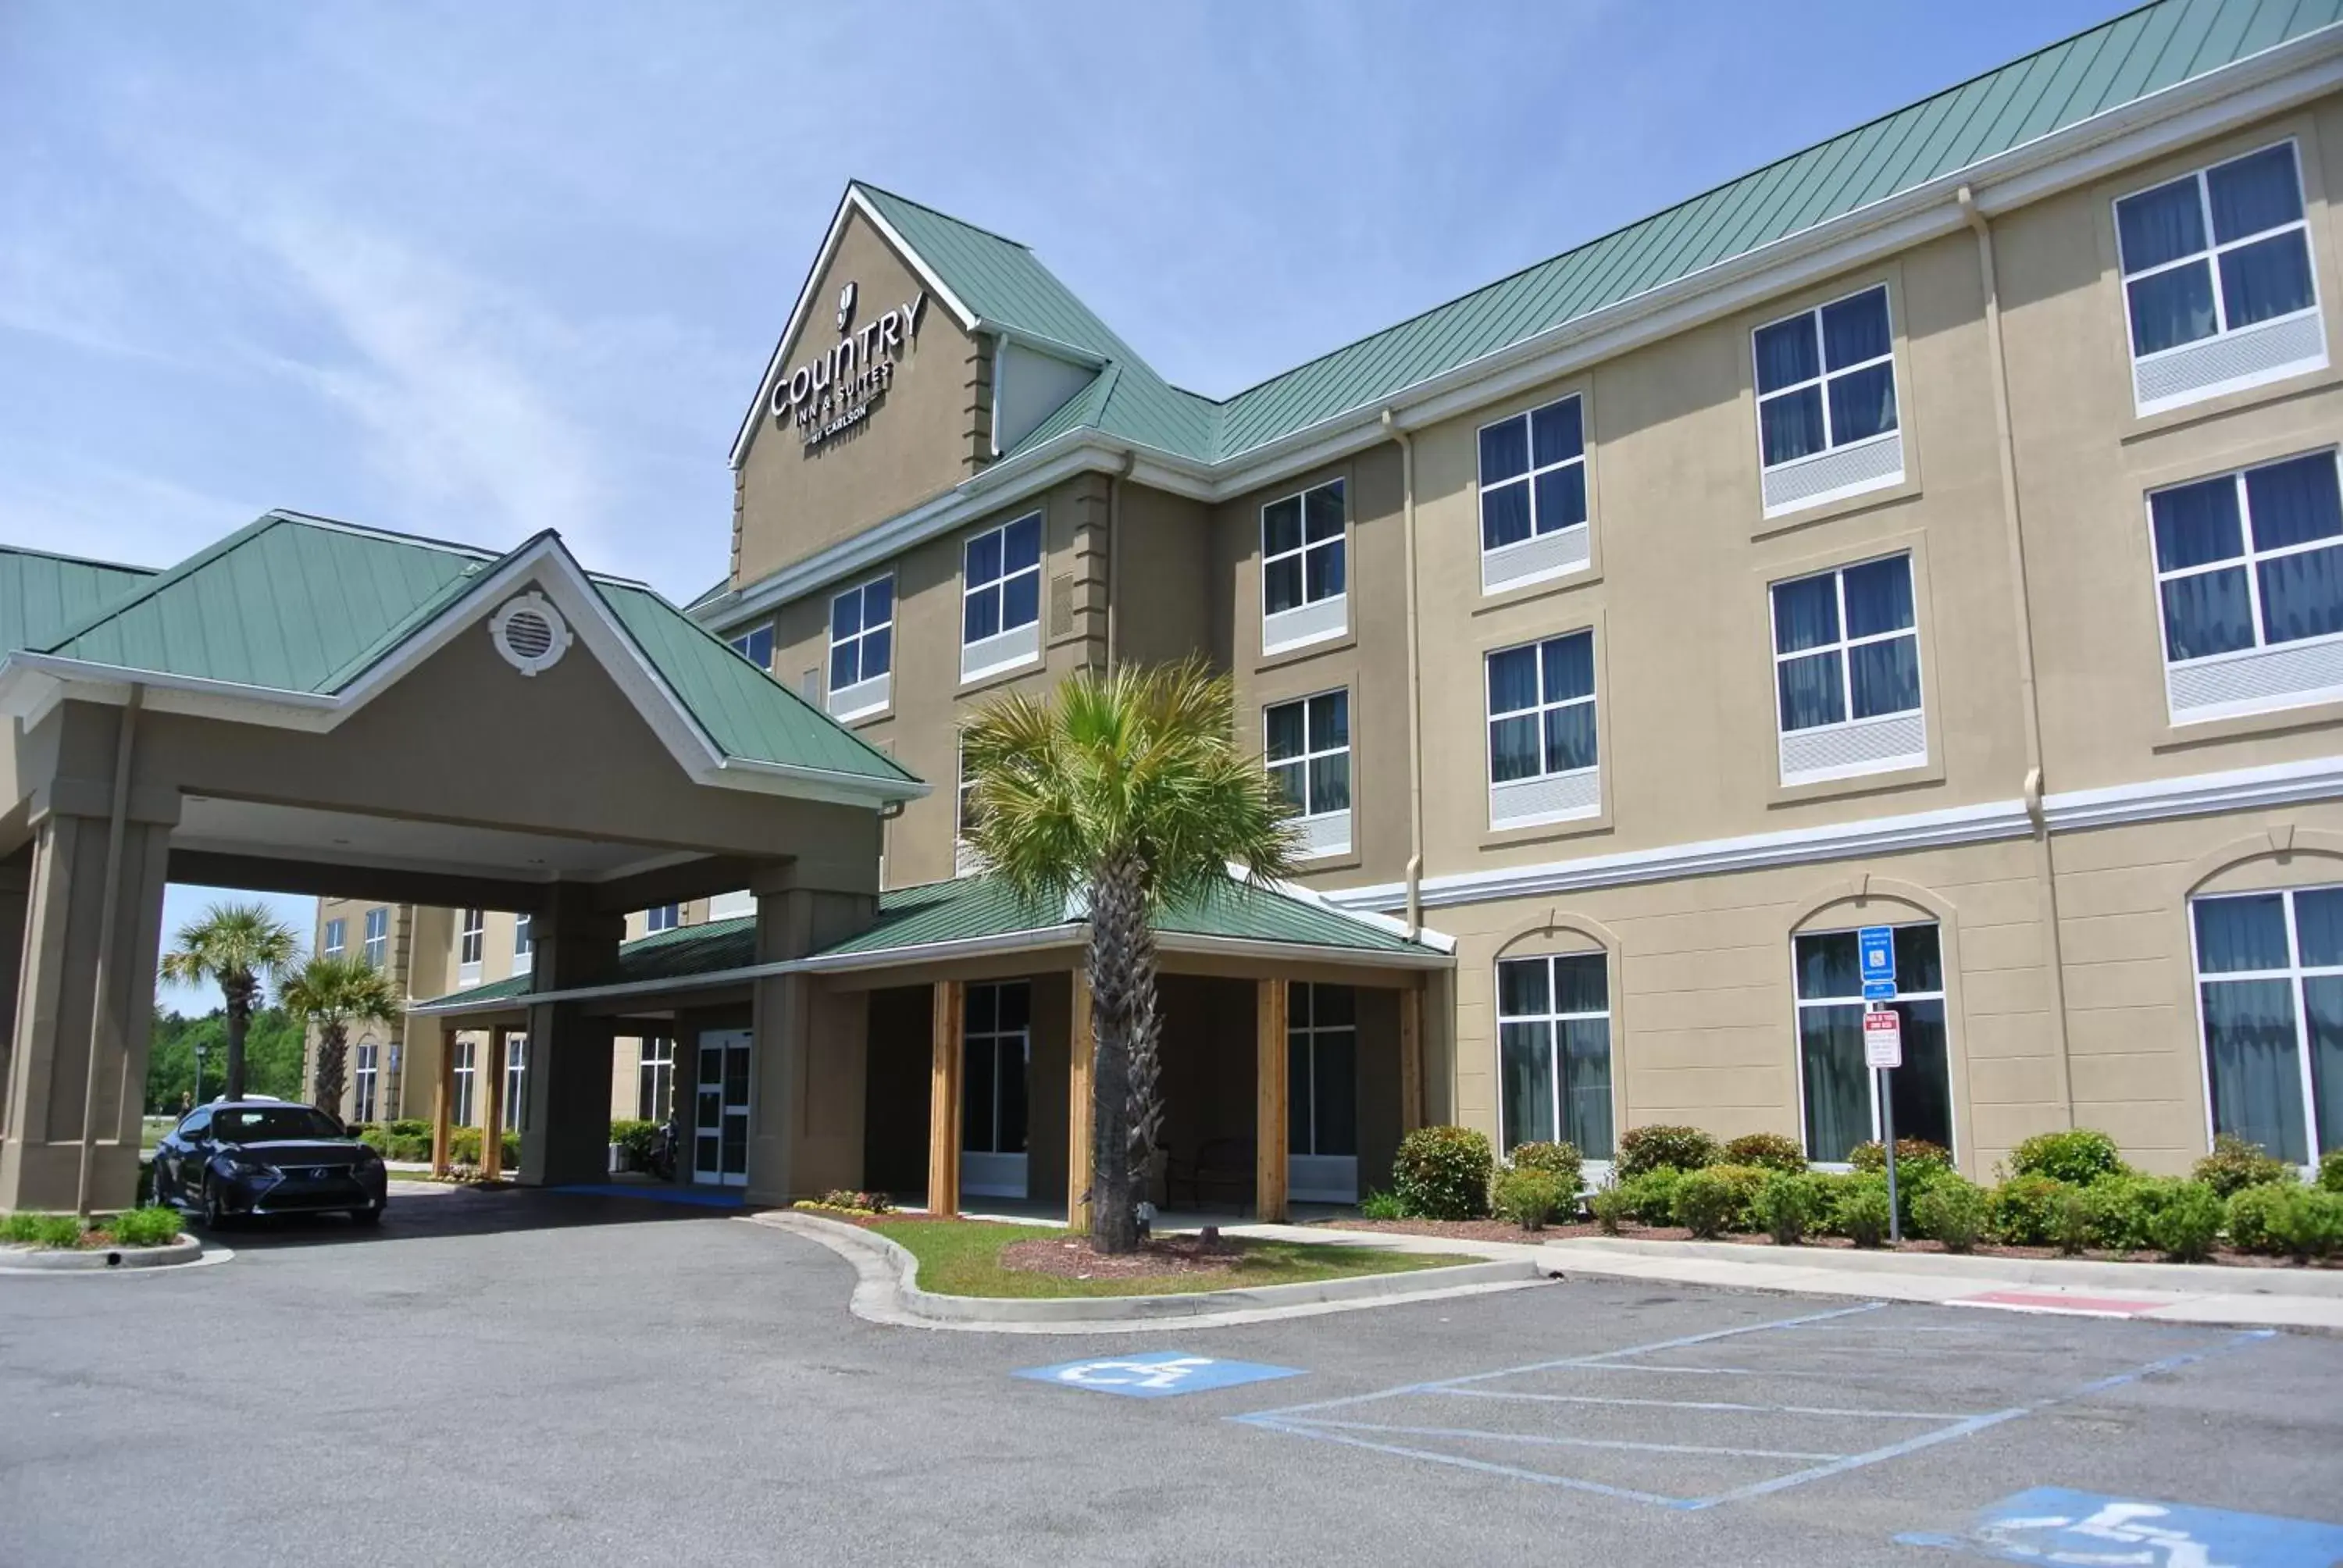 Property building, Facade/Entrance in Country Inn & Suites by Radisson, Savannah Airport, GA